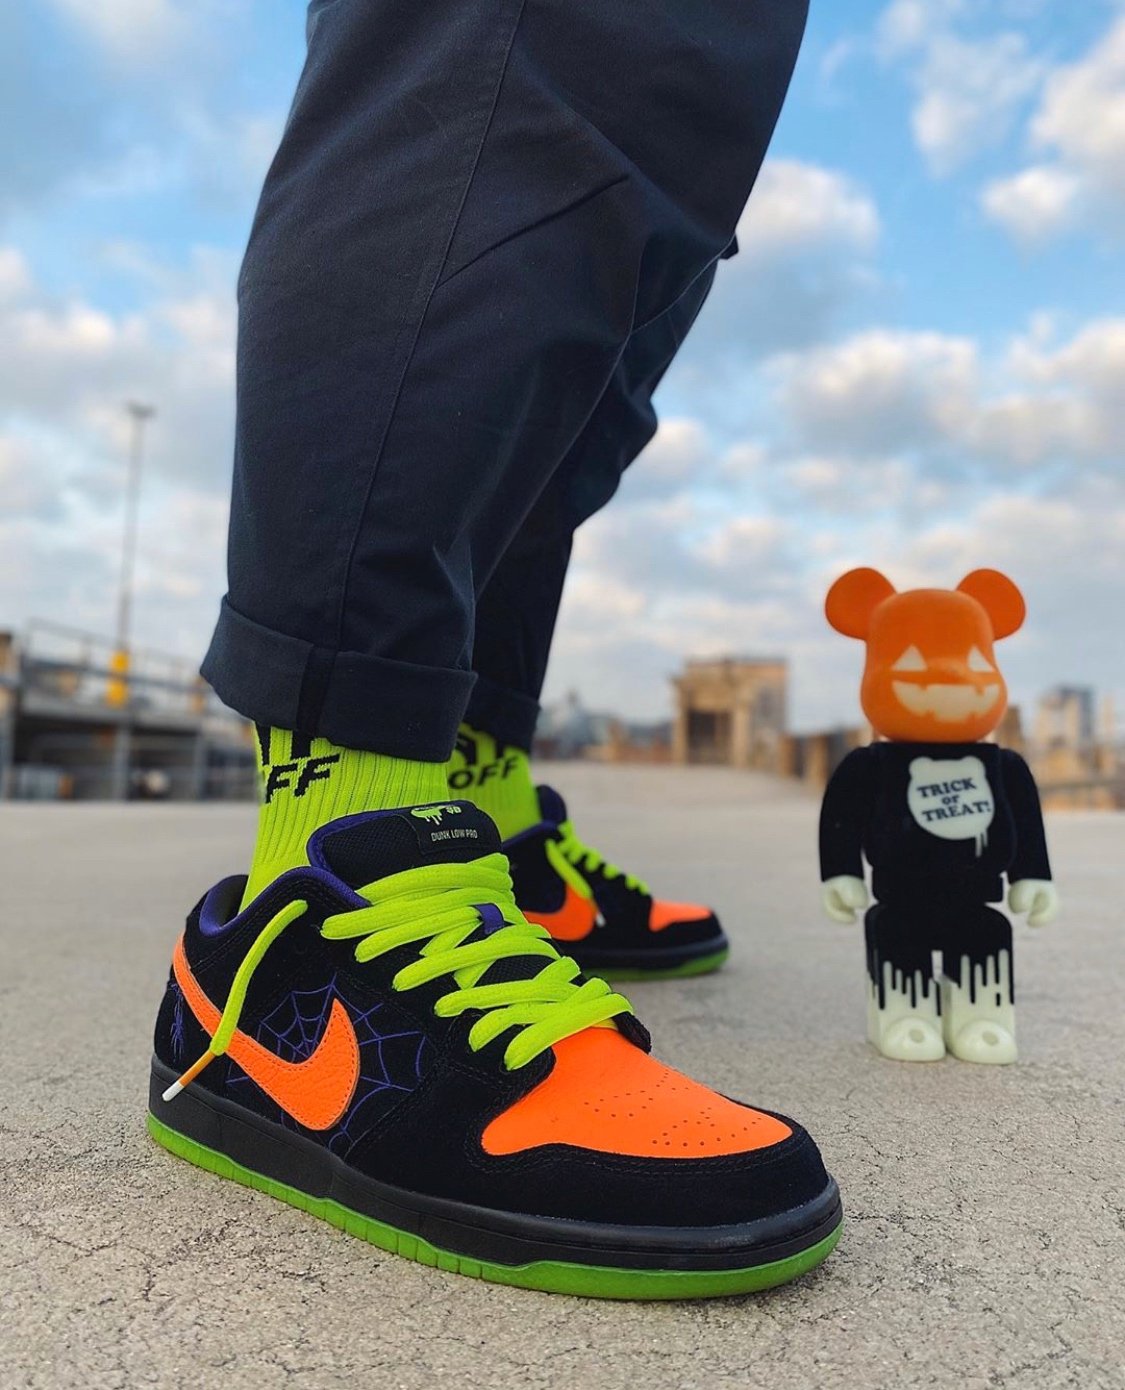 on Twitter: "Which Nike Dunk is your favorite? ⠀⠀⠀⠀⠀⠀⠀⠀⠀⠀⠀⁠ We like the Night of Mischief a lot 🎃 ⠀⠀⠀⠀⠀⠀⠀⠀⠀⠀⠀⁠ 📸 #nike #sb #sbdunk #halloween #sneaker #hskicks #everysize https://t.co/2ZcHzBa4M2" /